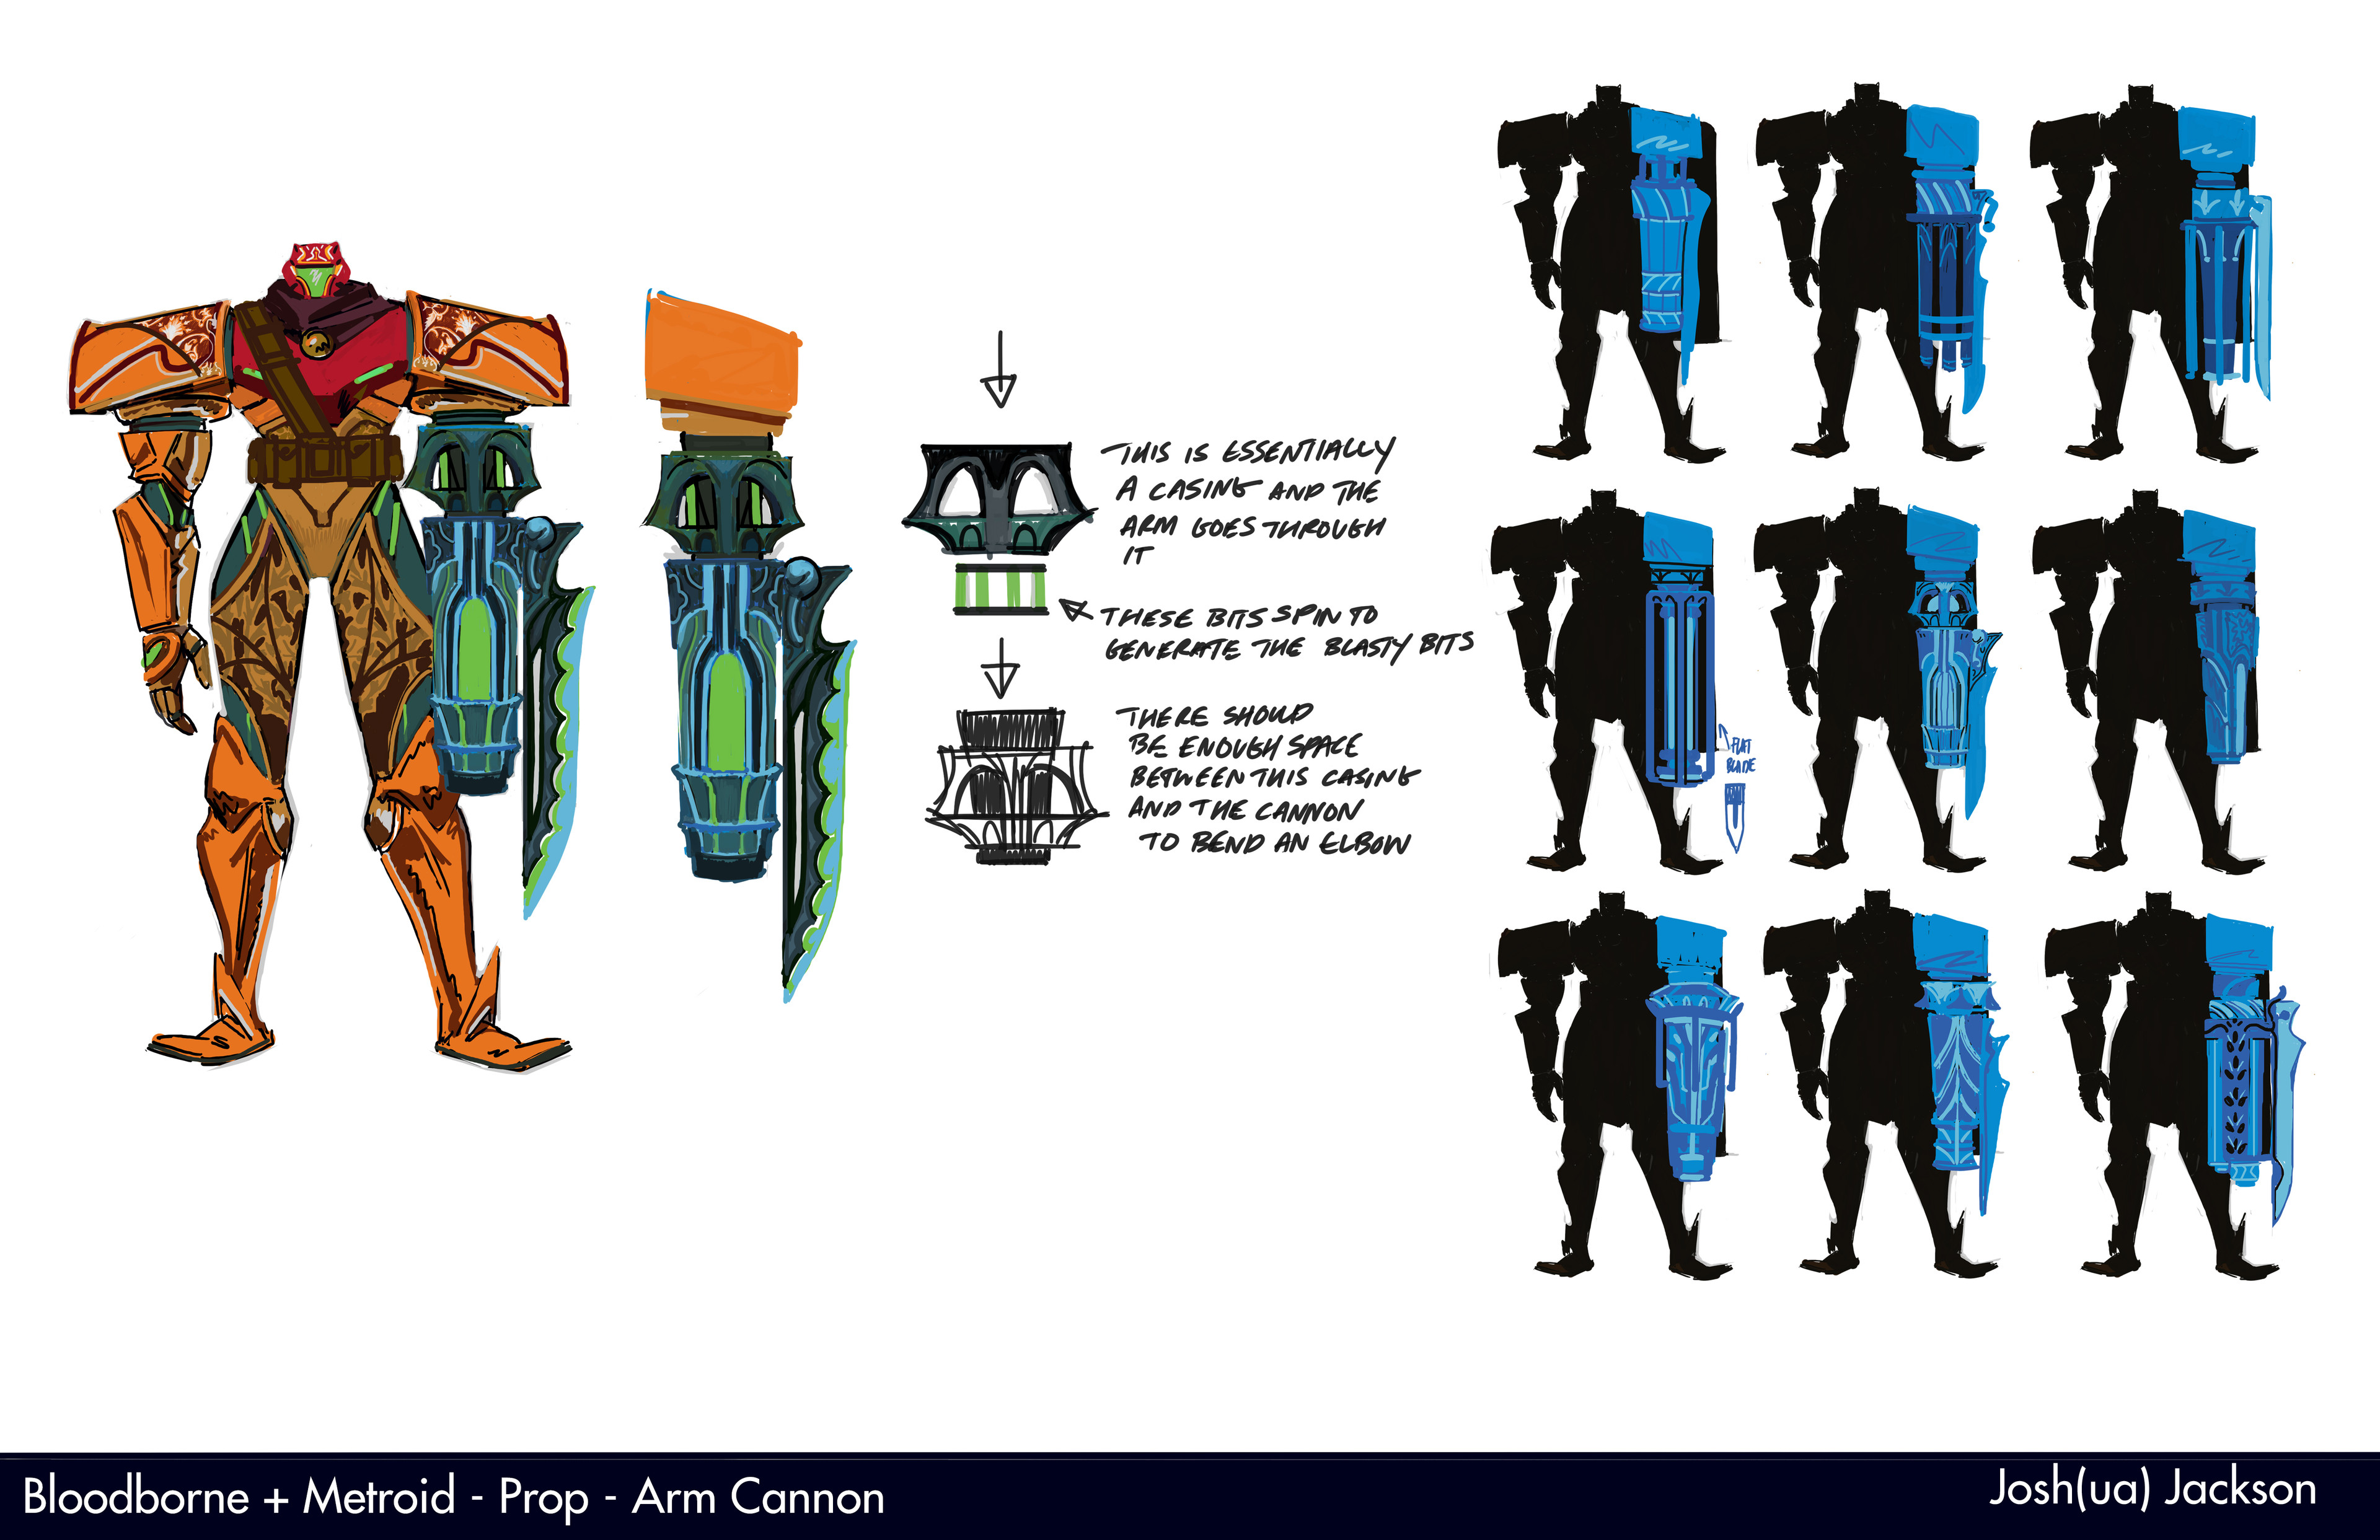 Final Arm Cannon design and iterations